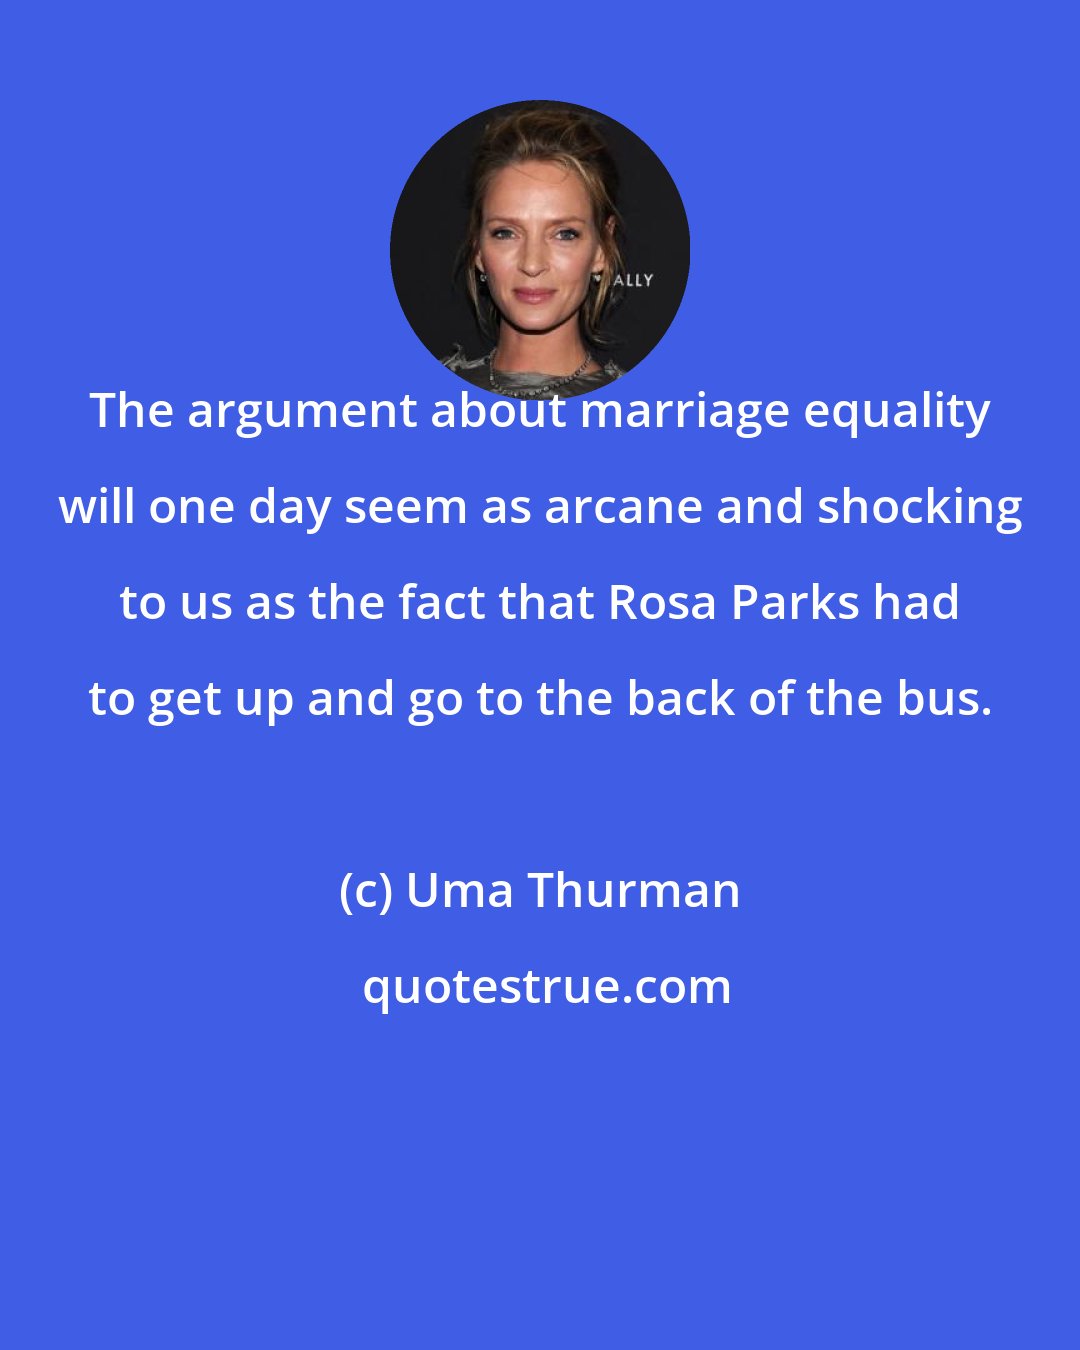 Uma Thurman: The argument about marriage equality will one day seem as arcane and shocking to us as the fact that Rosa Parks had to get up and go to the back of the bus.